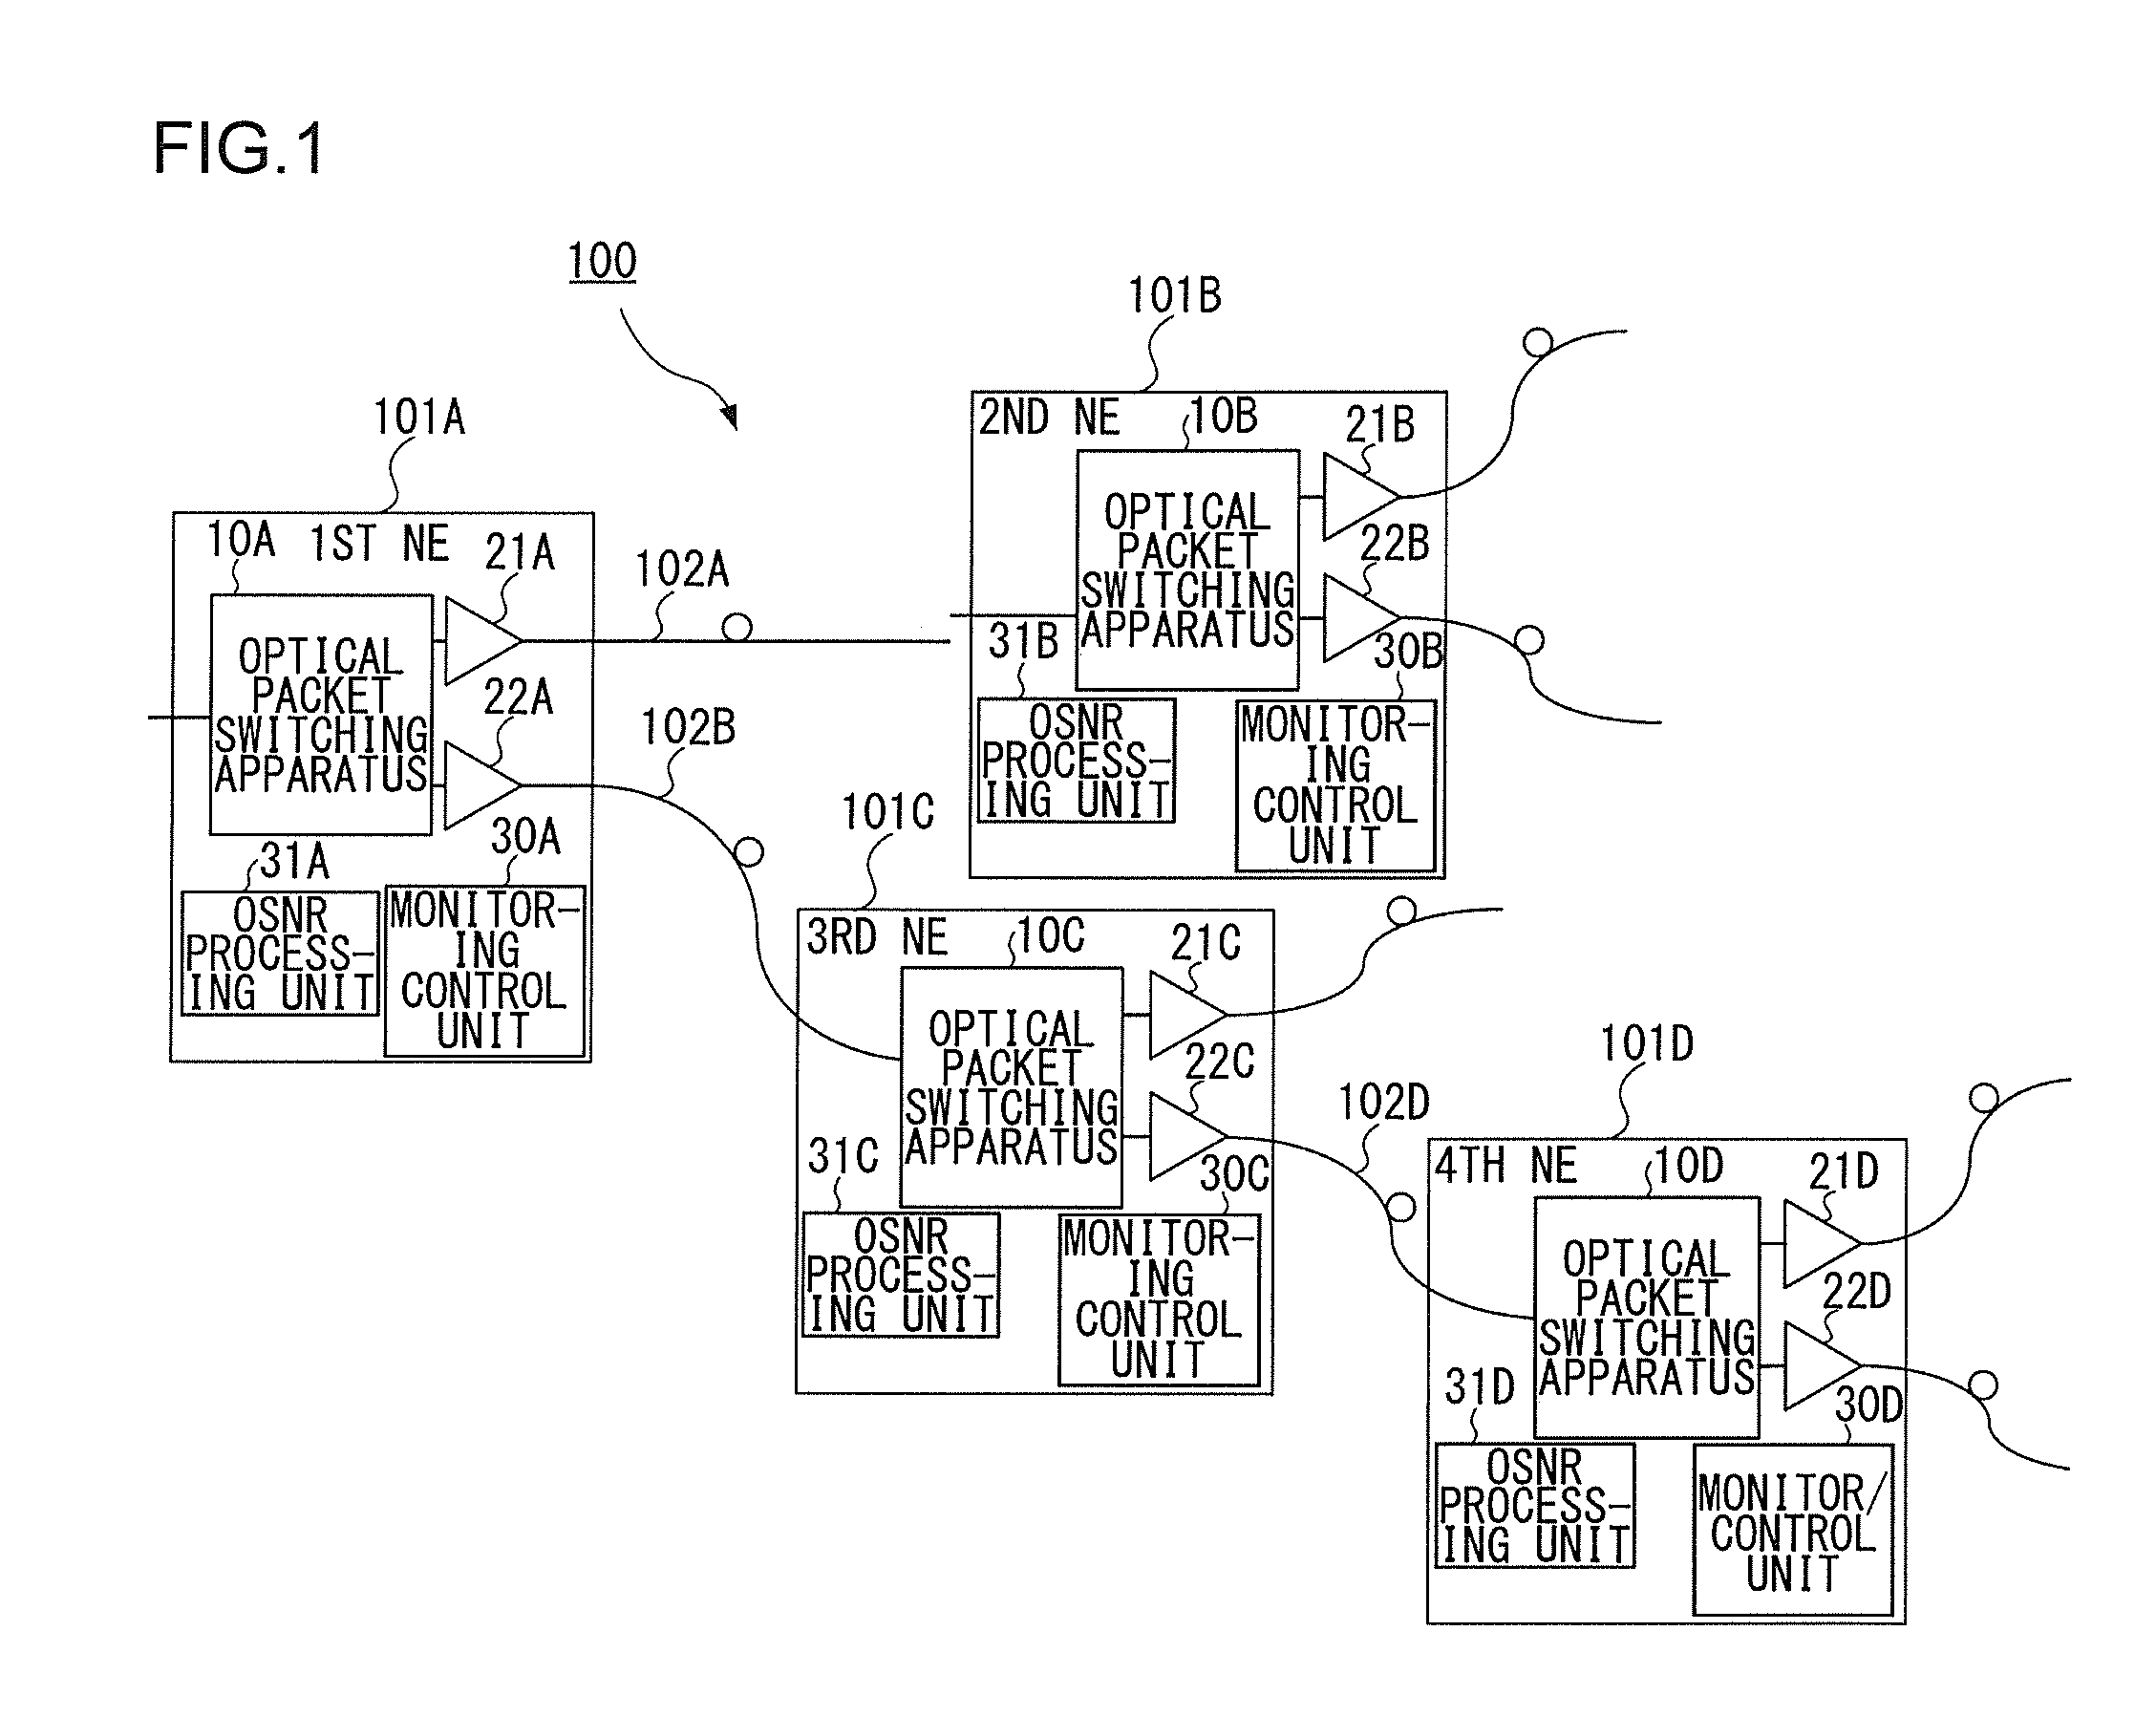 Optical packet switching system